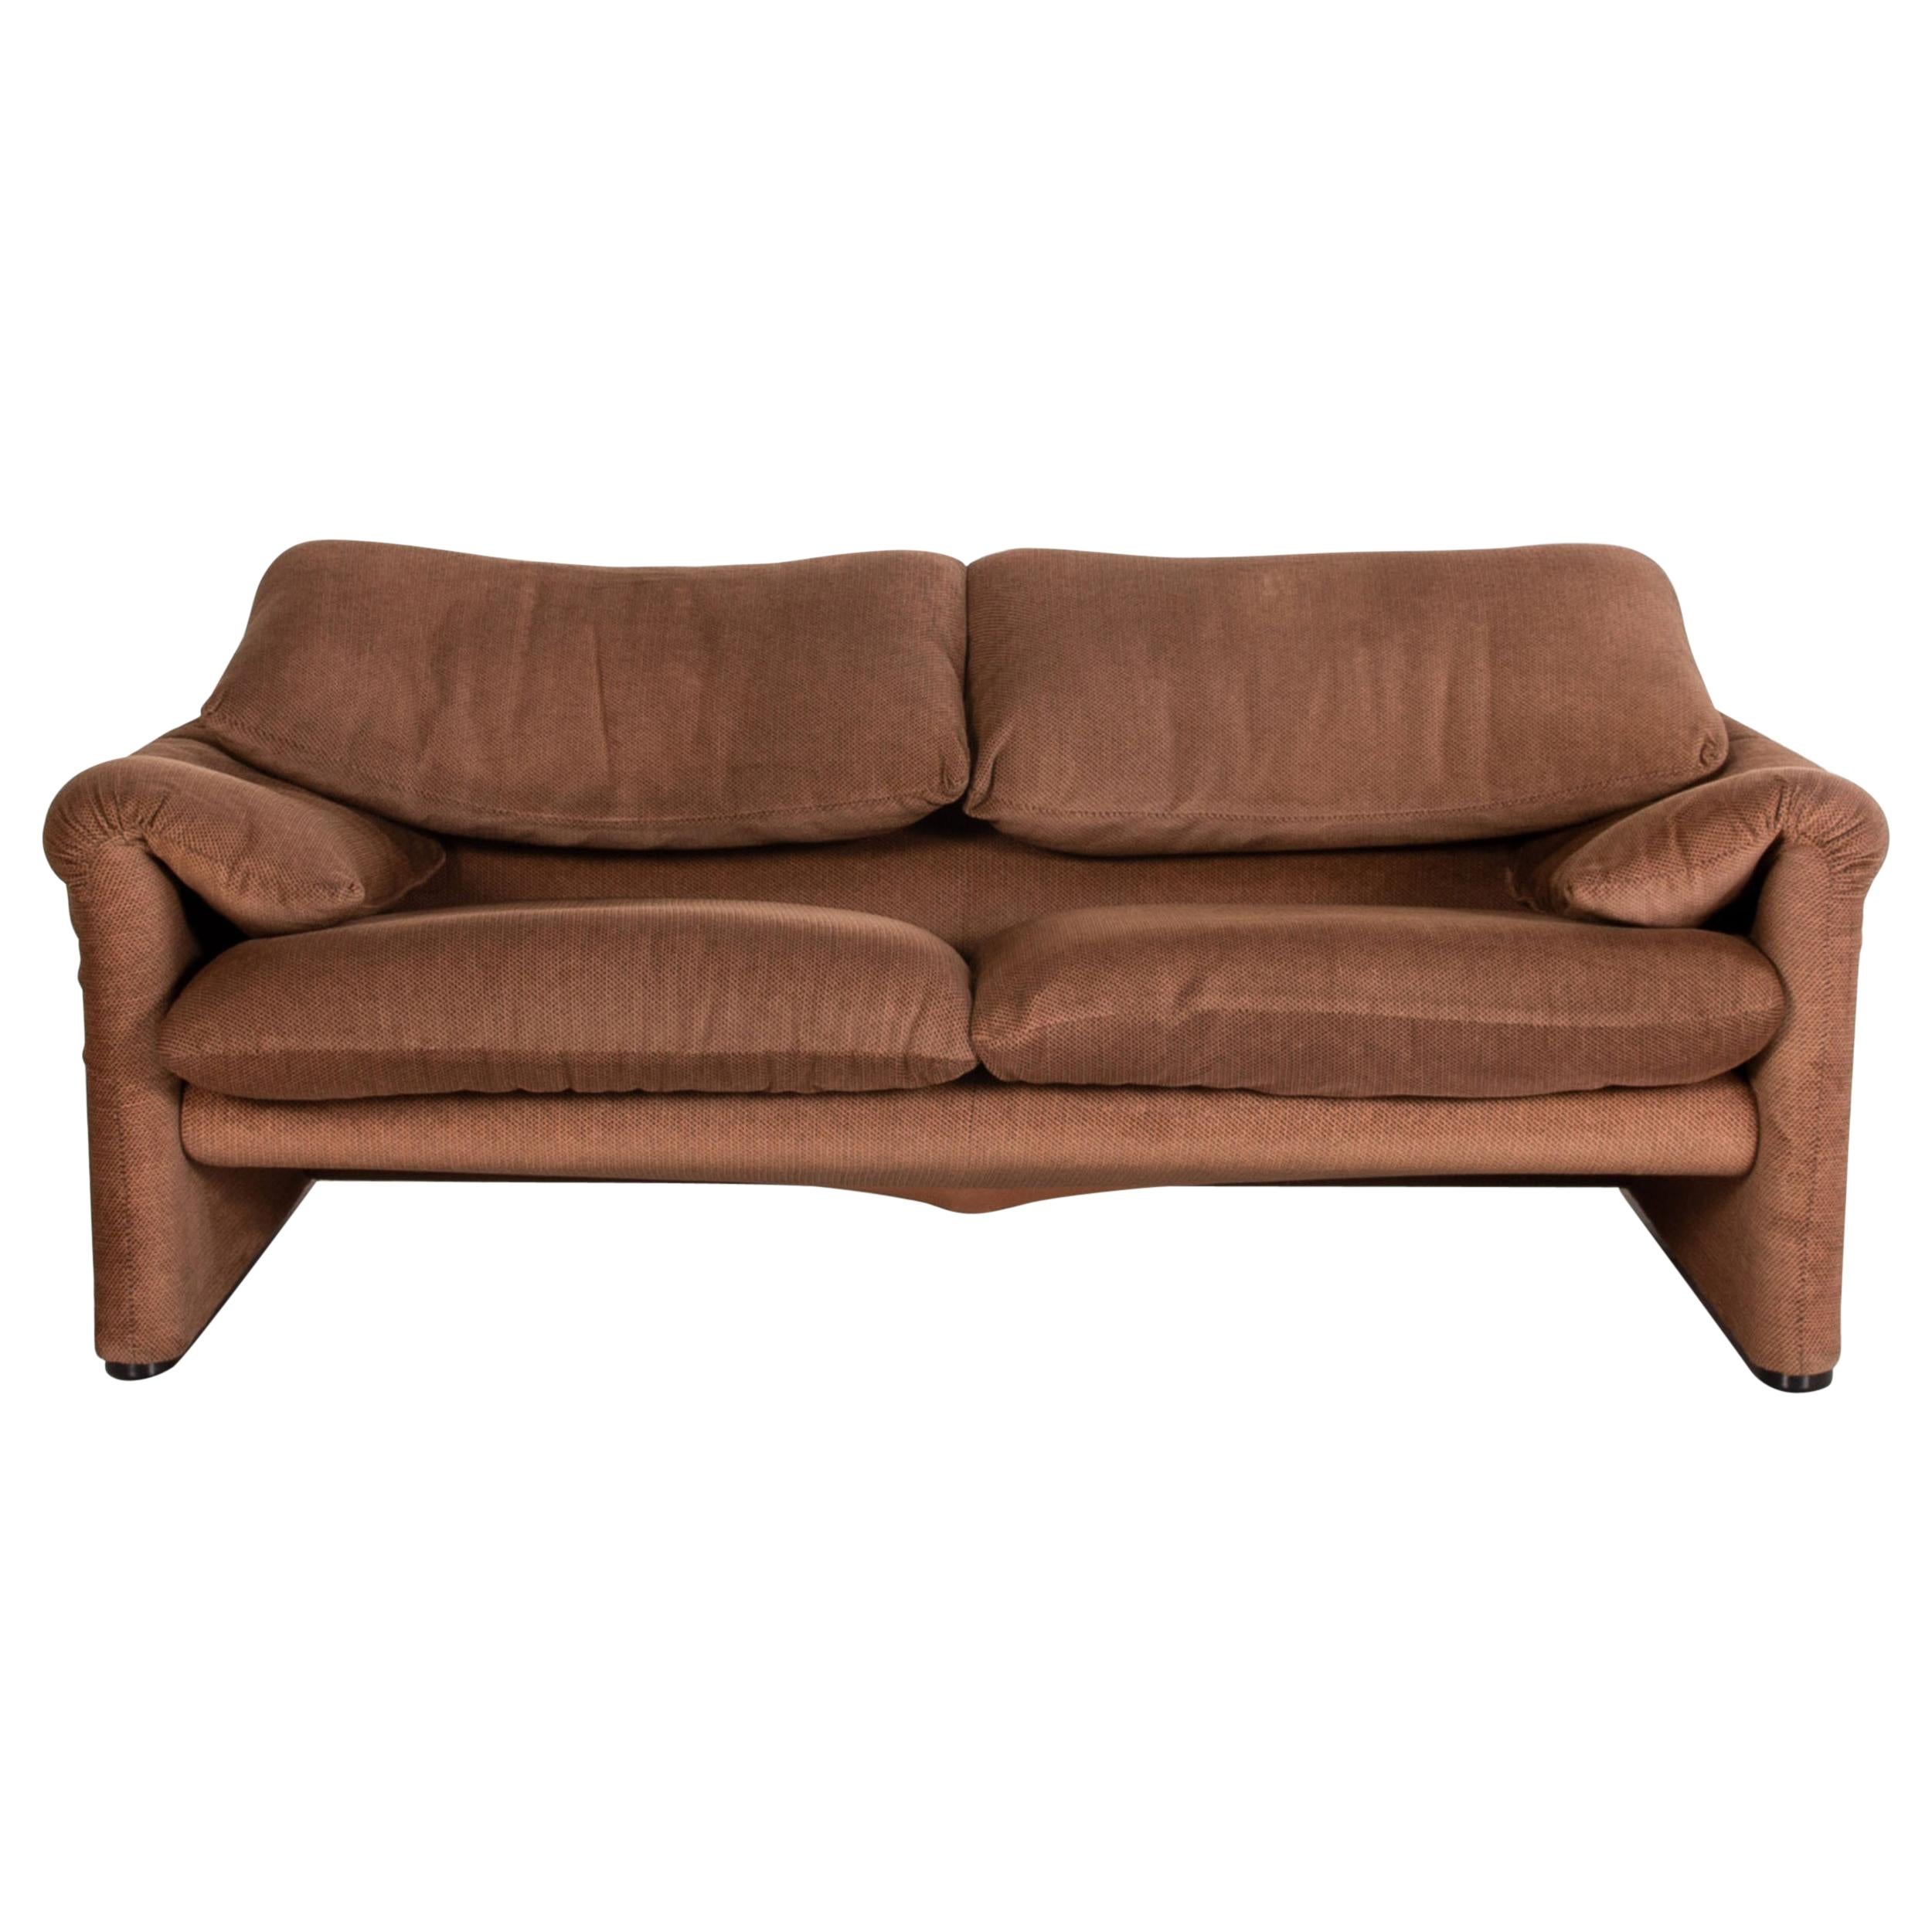 Cassina Maralunga Fabric Sofa Brown Two-Seater Function Couch